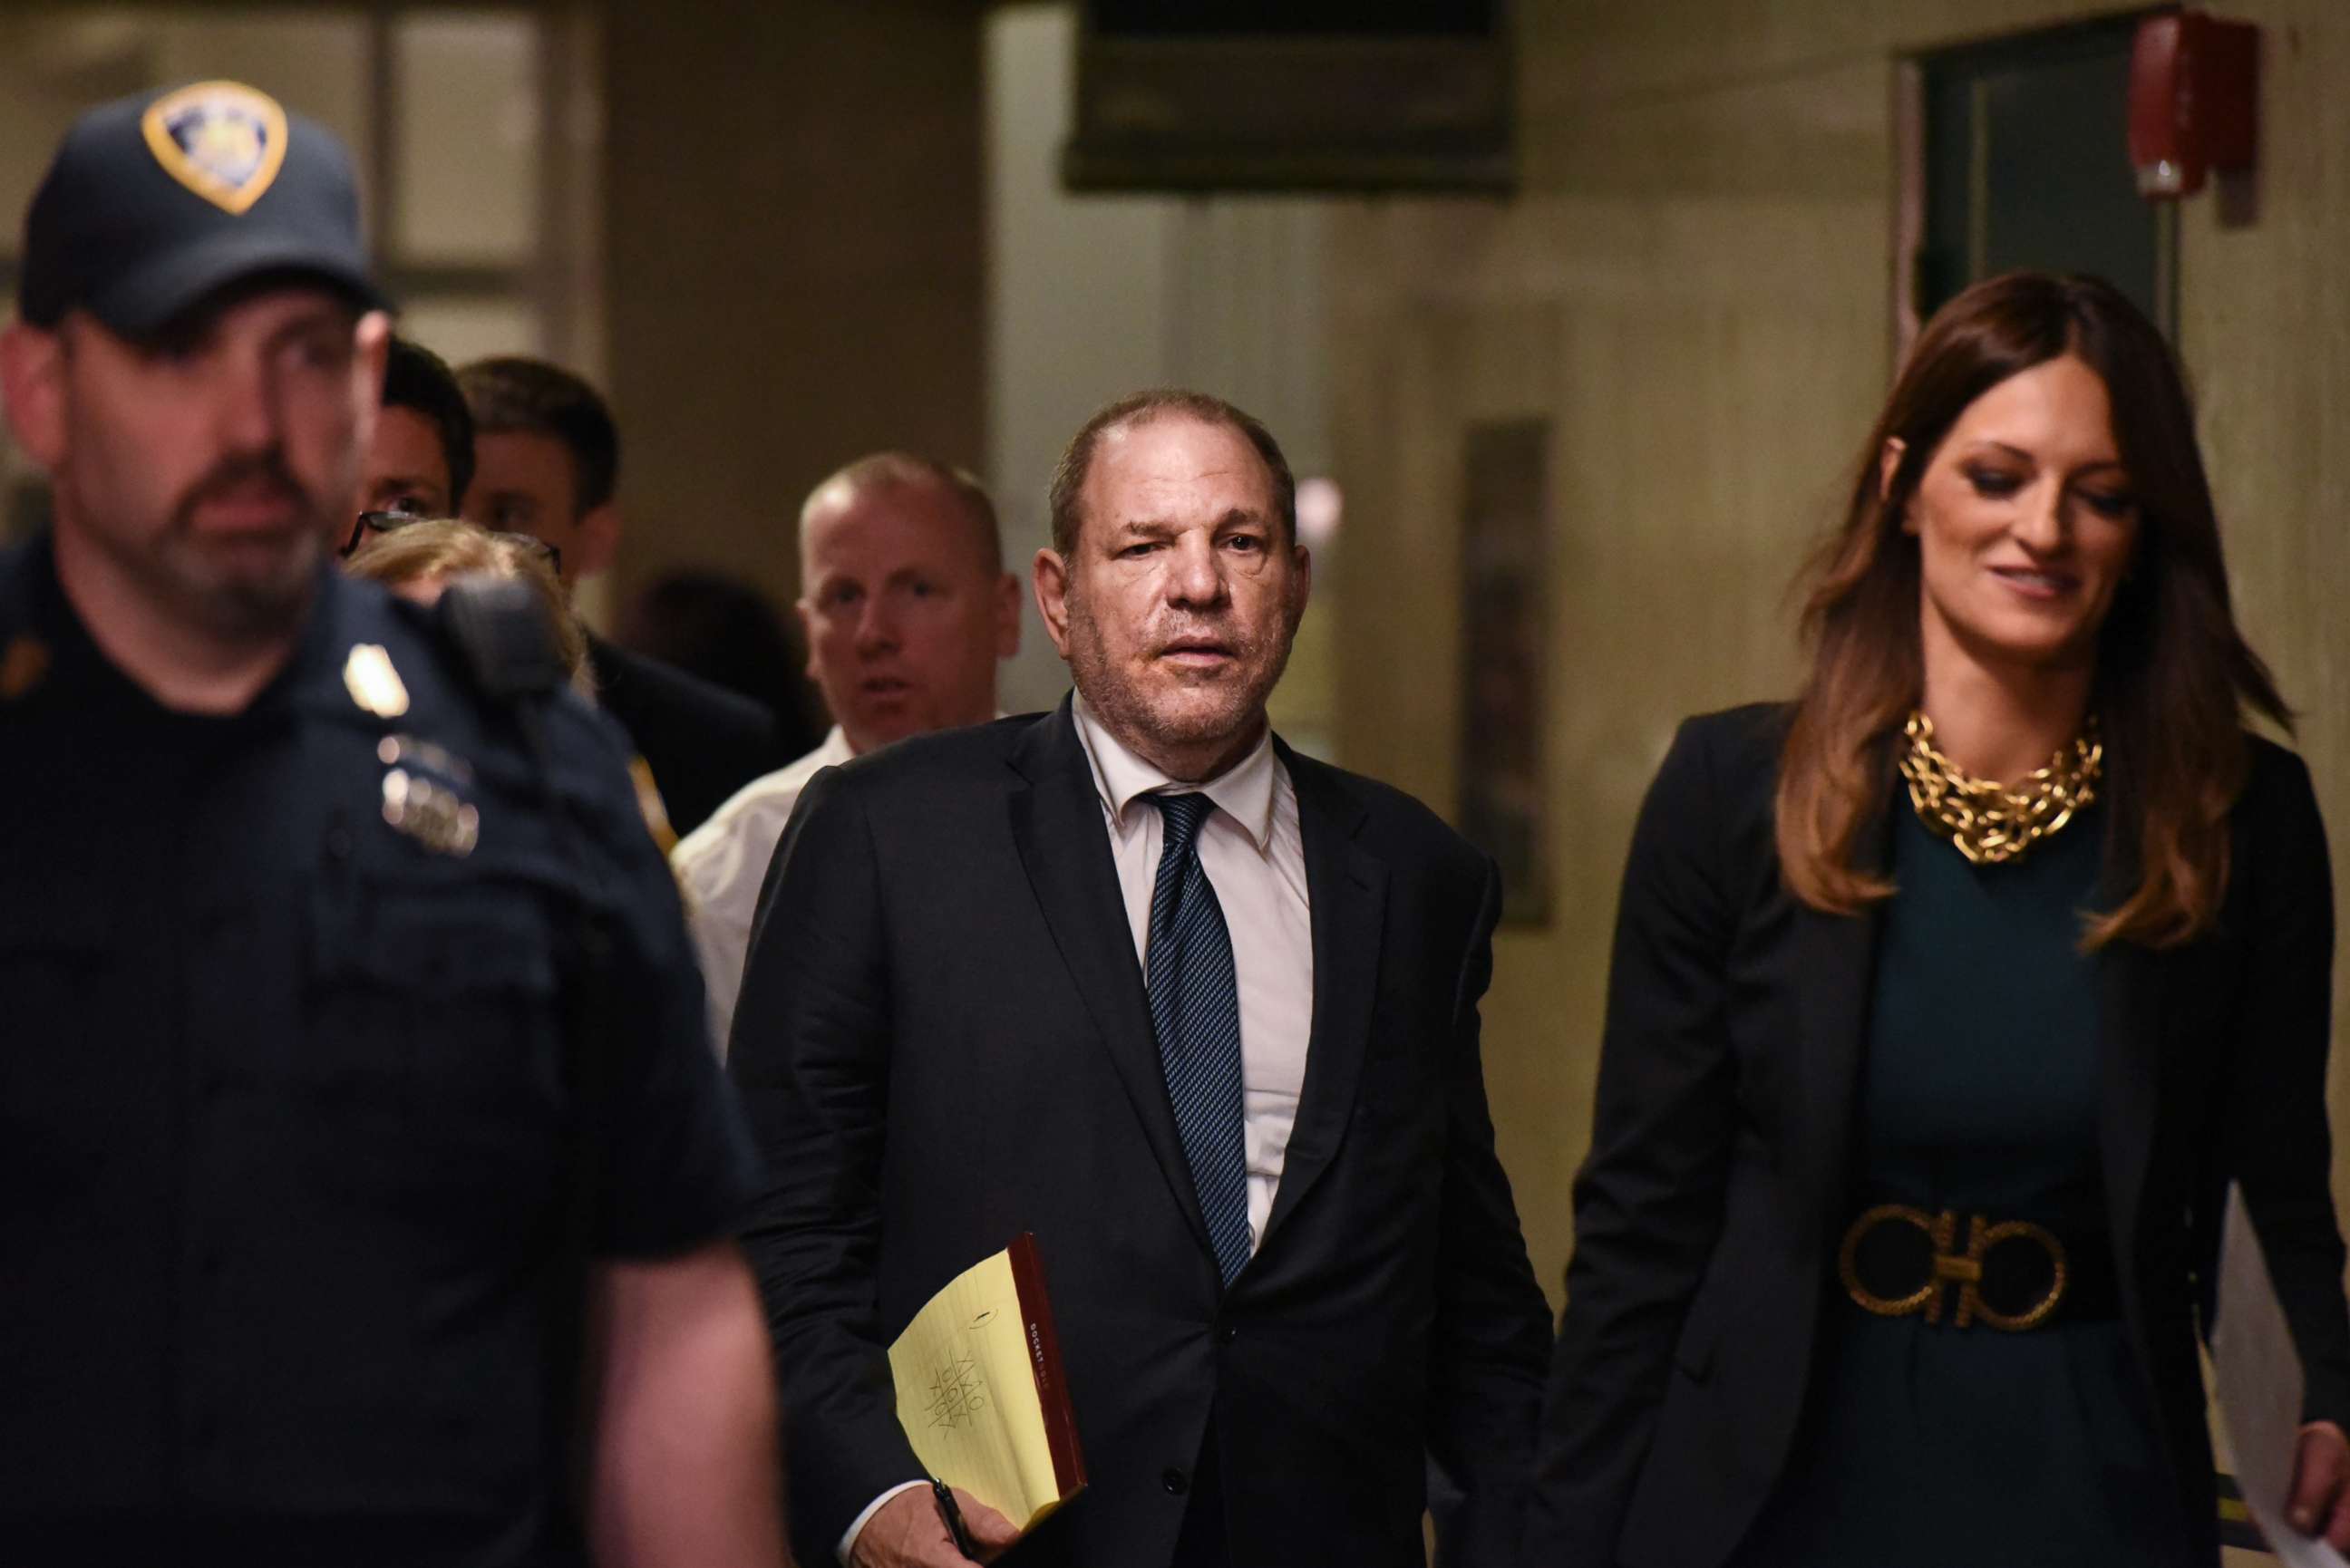 PHOTO: Harvey Weinstein enters the courthouse on July 11, 2019 in New York.